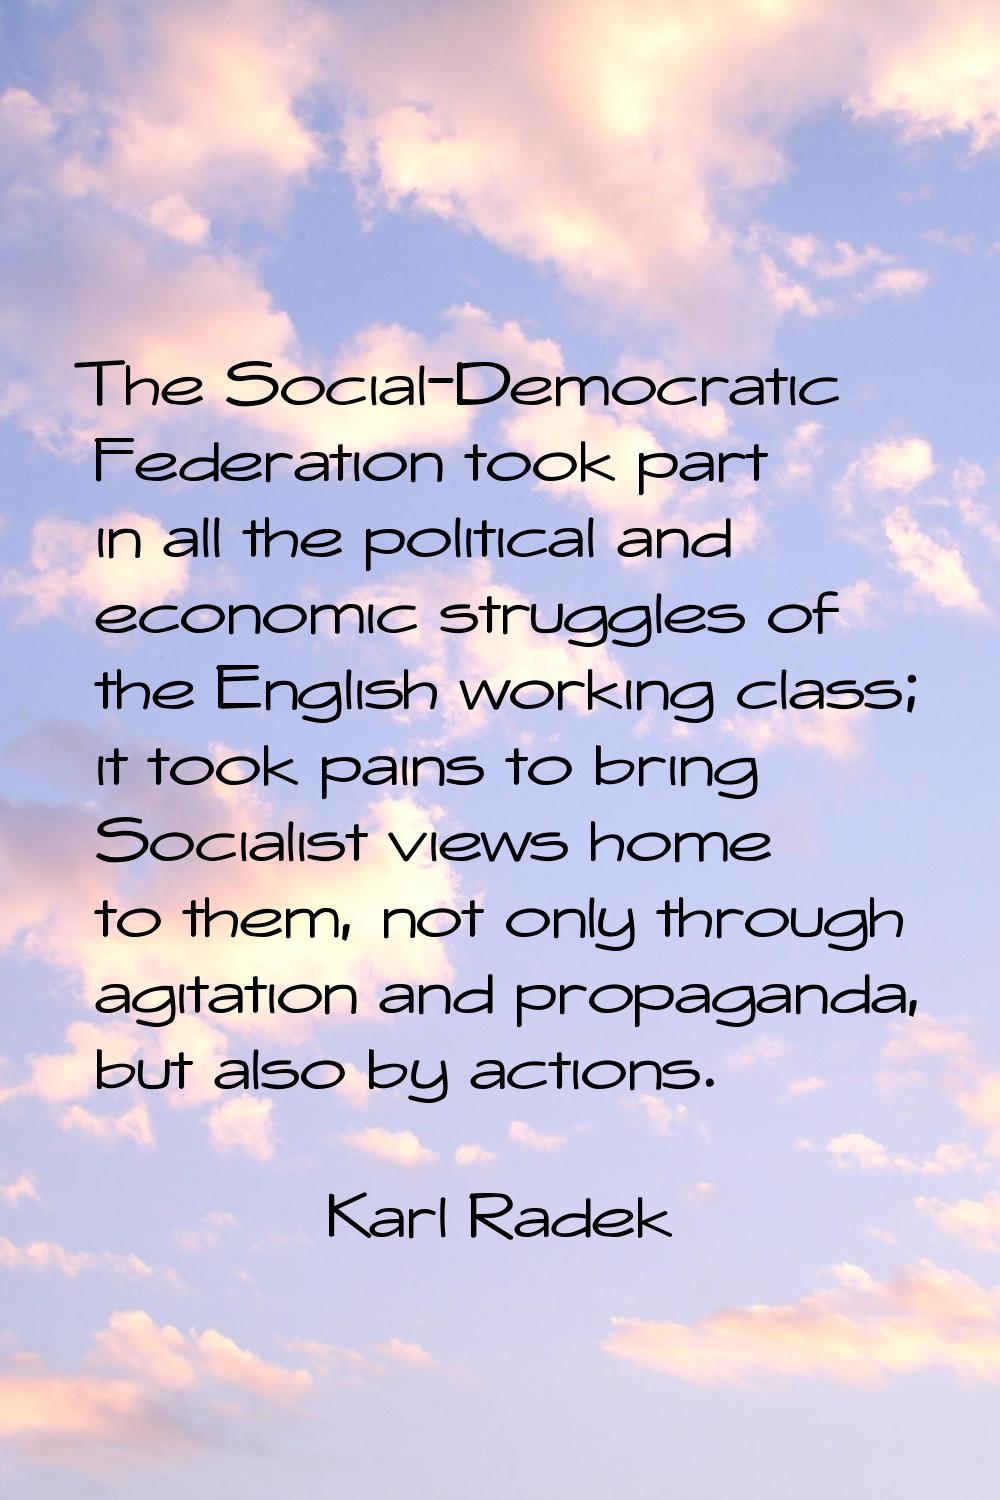 The Social-Democratic Federation took part in all the political and economic struggles of the Engli